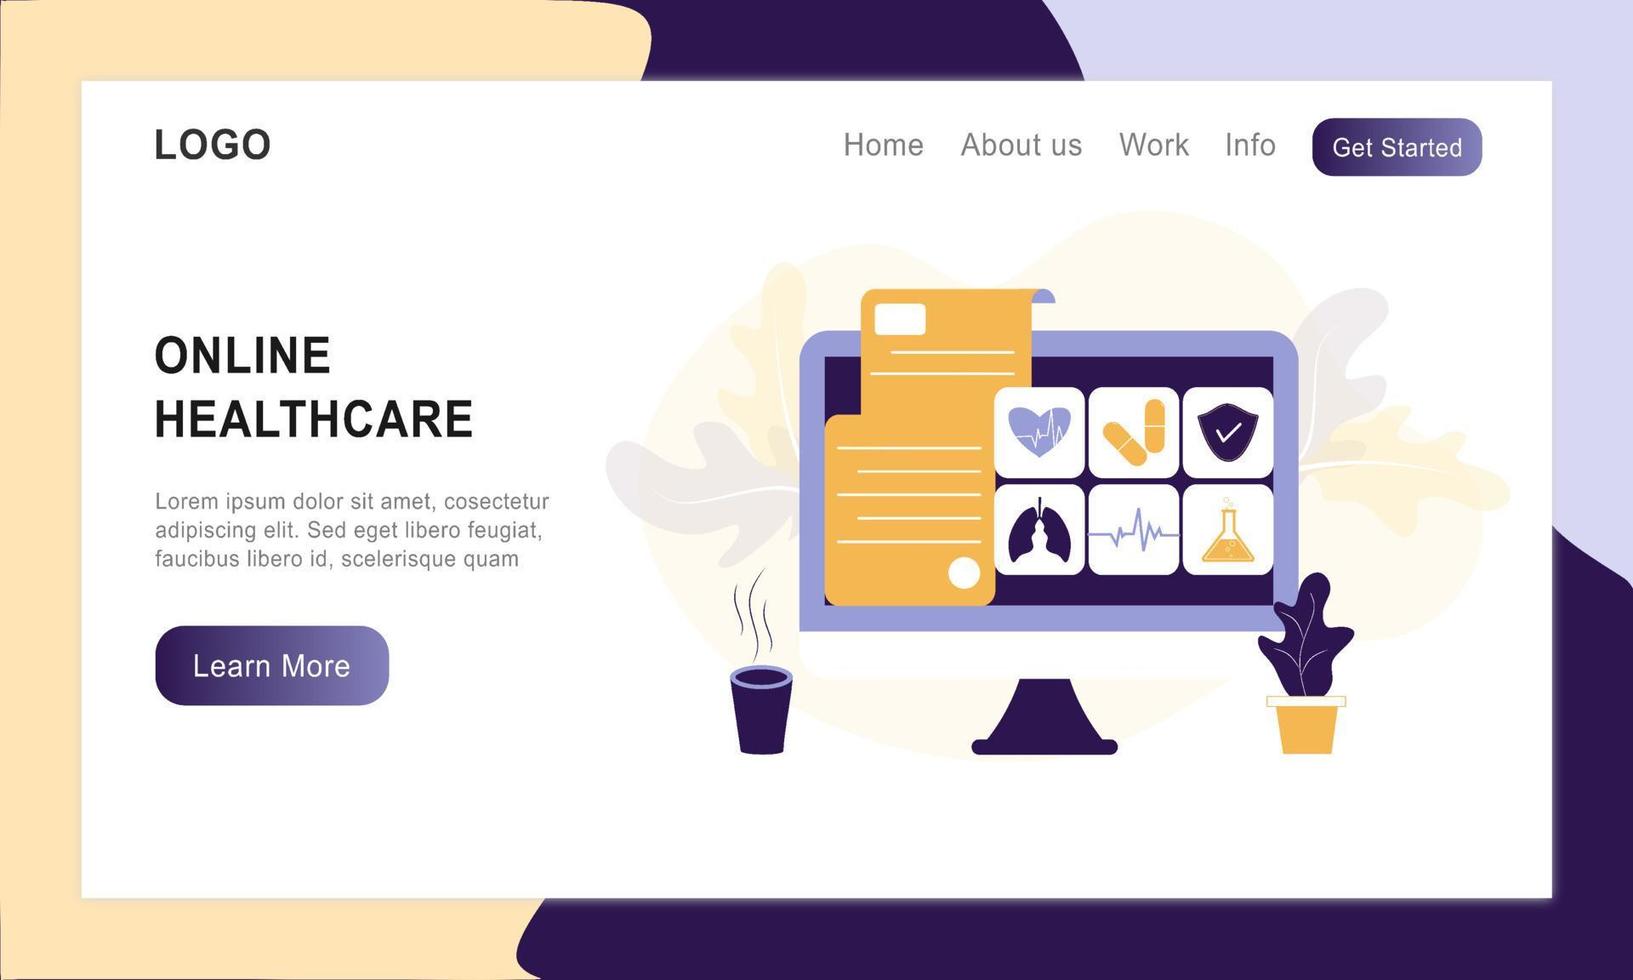 Landing page of online healthcare flat illustration. Online medical consultation and treatment via app smartphone or computer connected internet clinic. Online ask doctor consultation in mobile vector